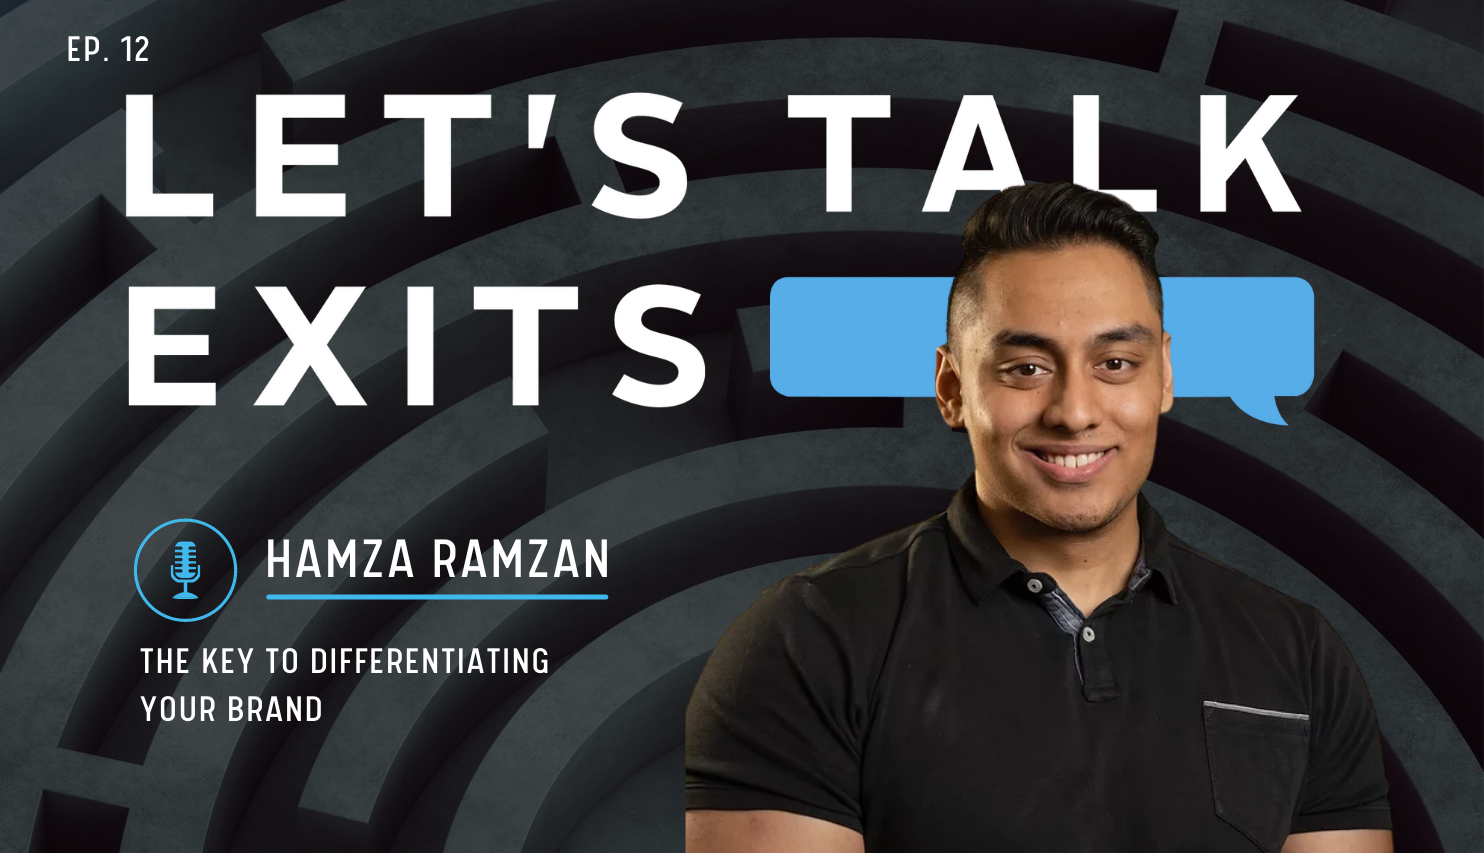 The Key to Differentiating Your Brand with Hamza Ramzan